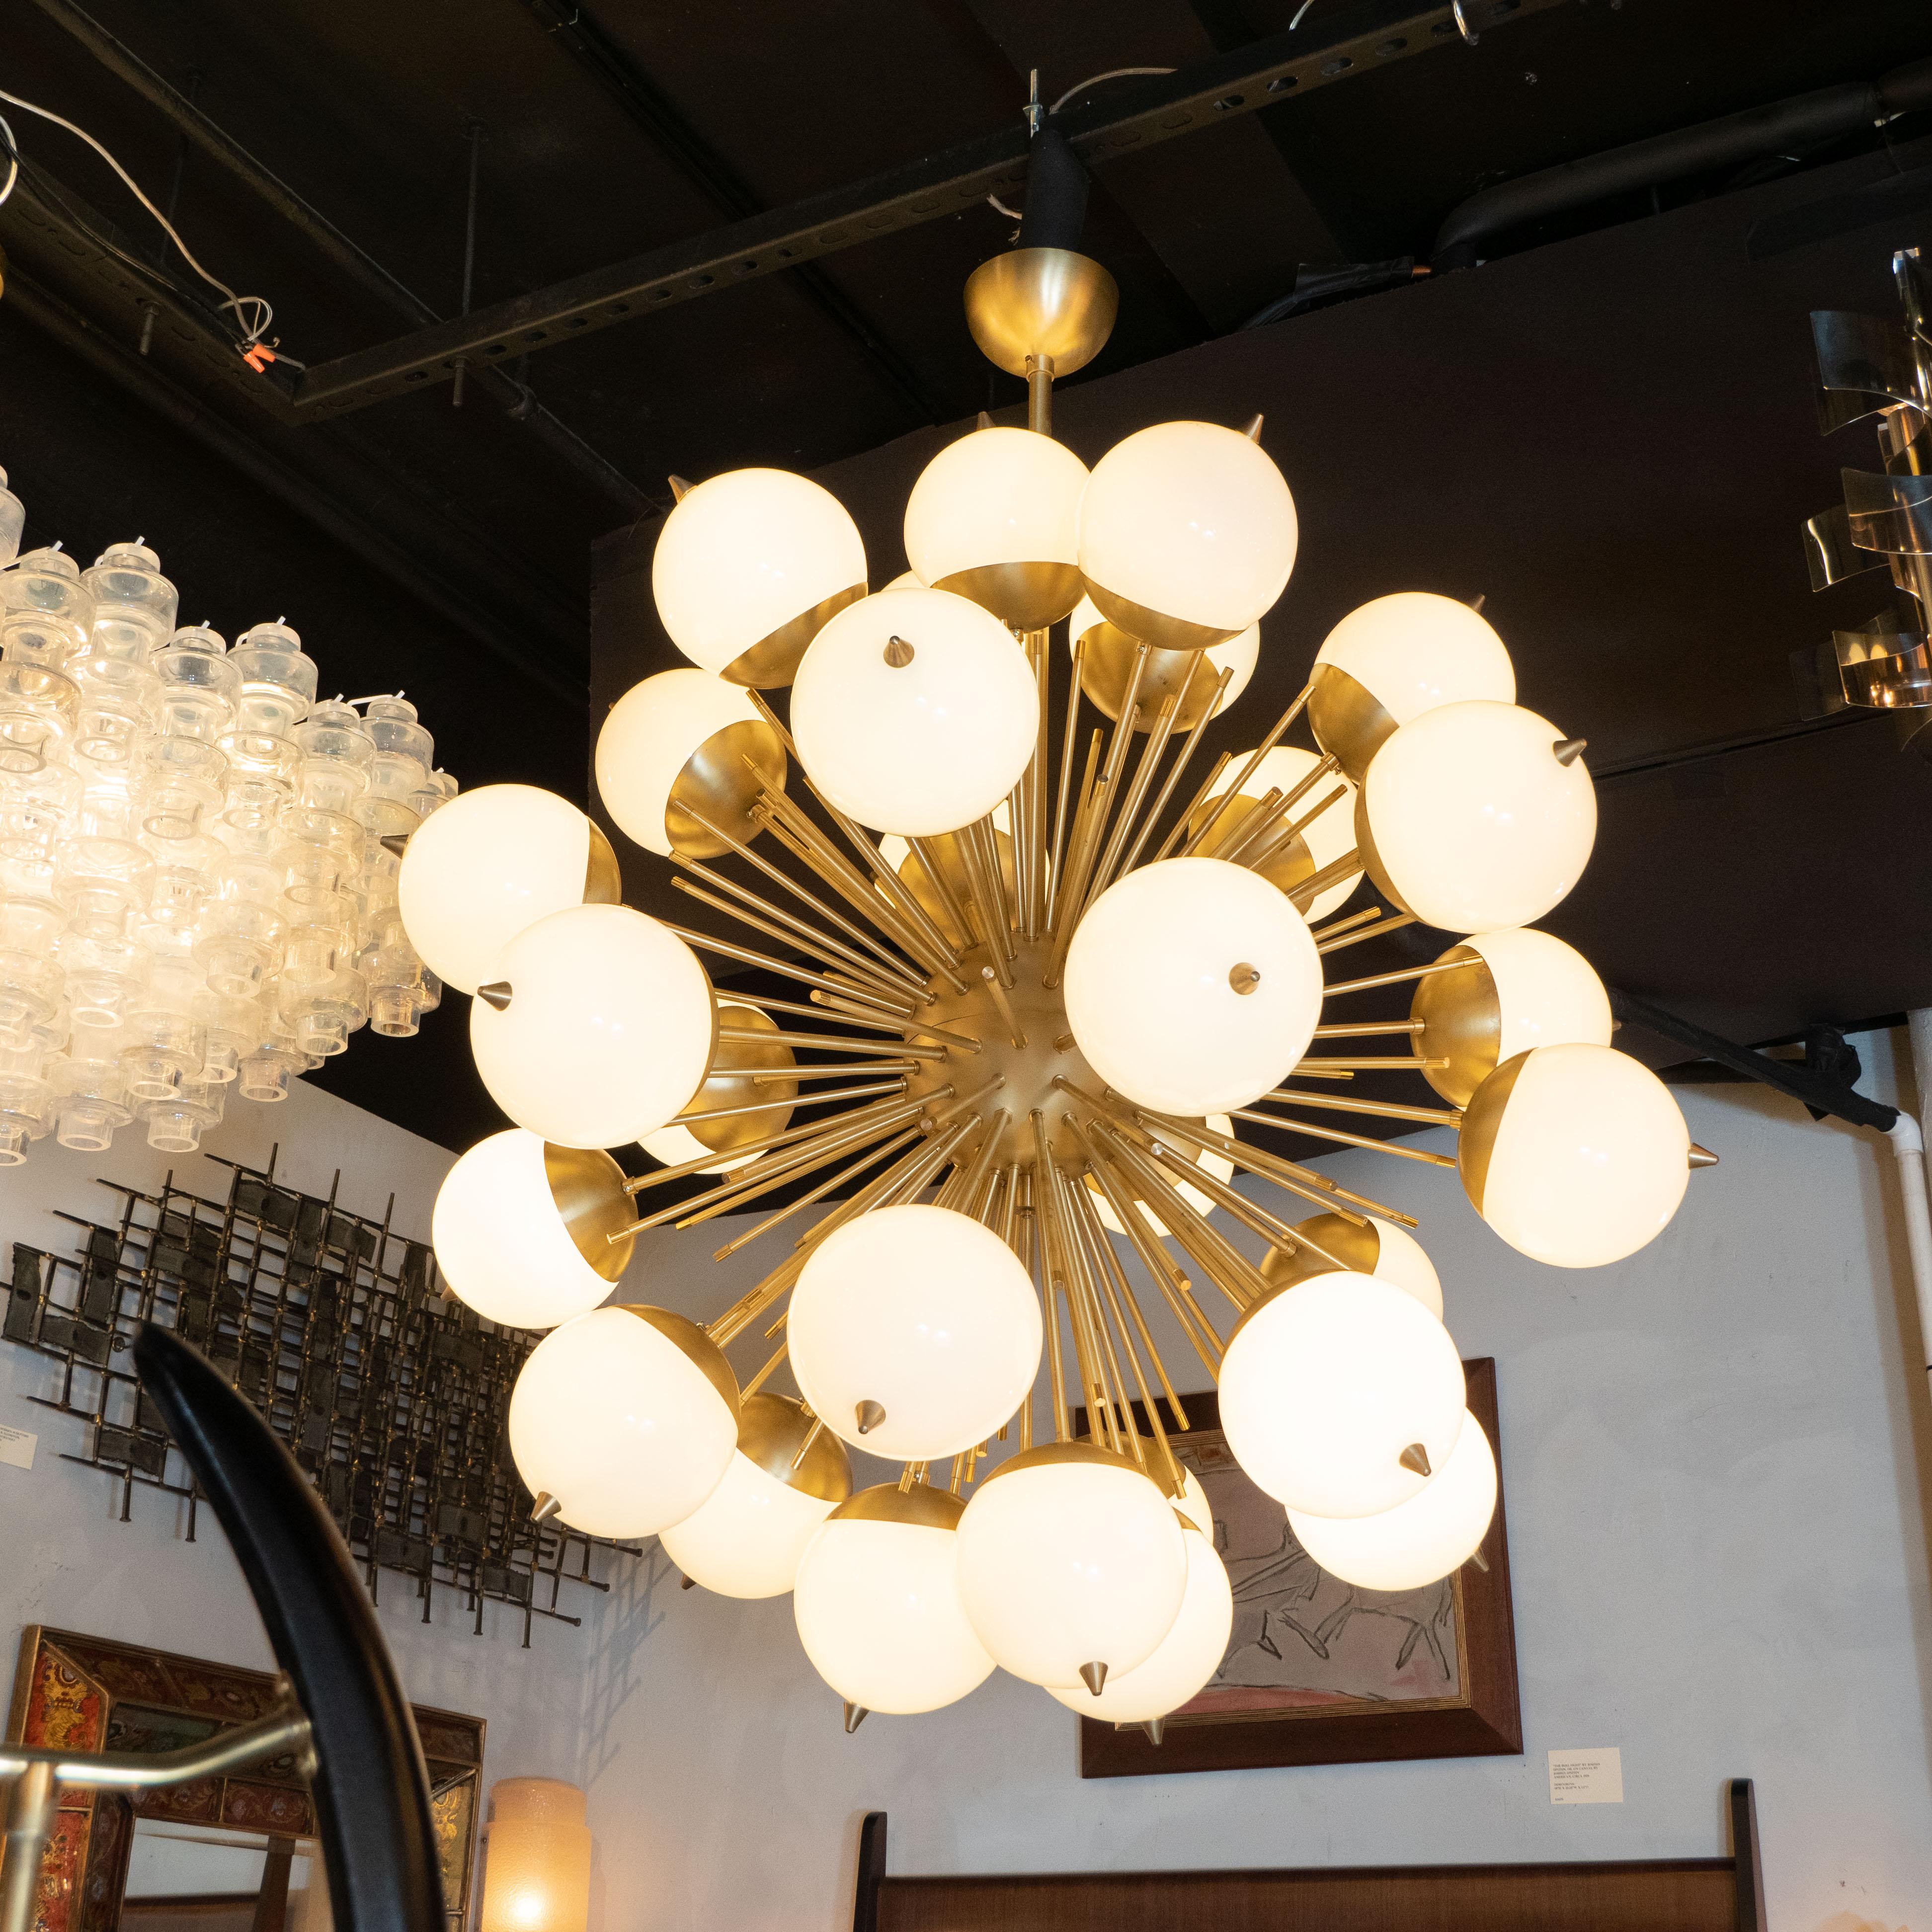 This stunning chandelier was hand blown in Murano, Italy- the island off the coast of Venice renowned for centuries for its superlative glass production. It features an abundance of brushed brass cylindrical rods emanating from a spherical body in